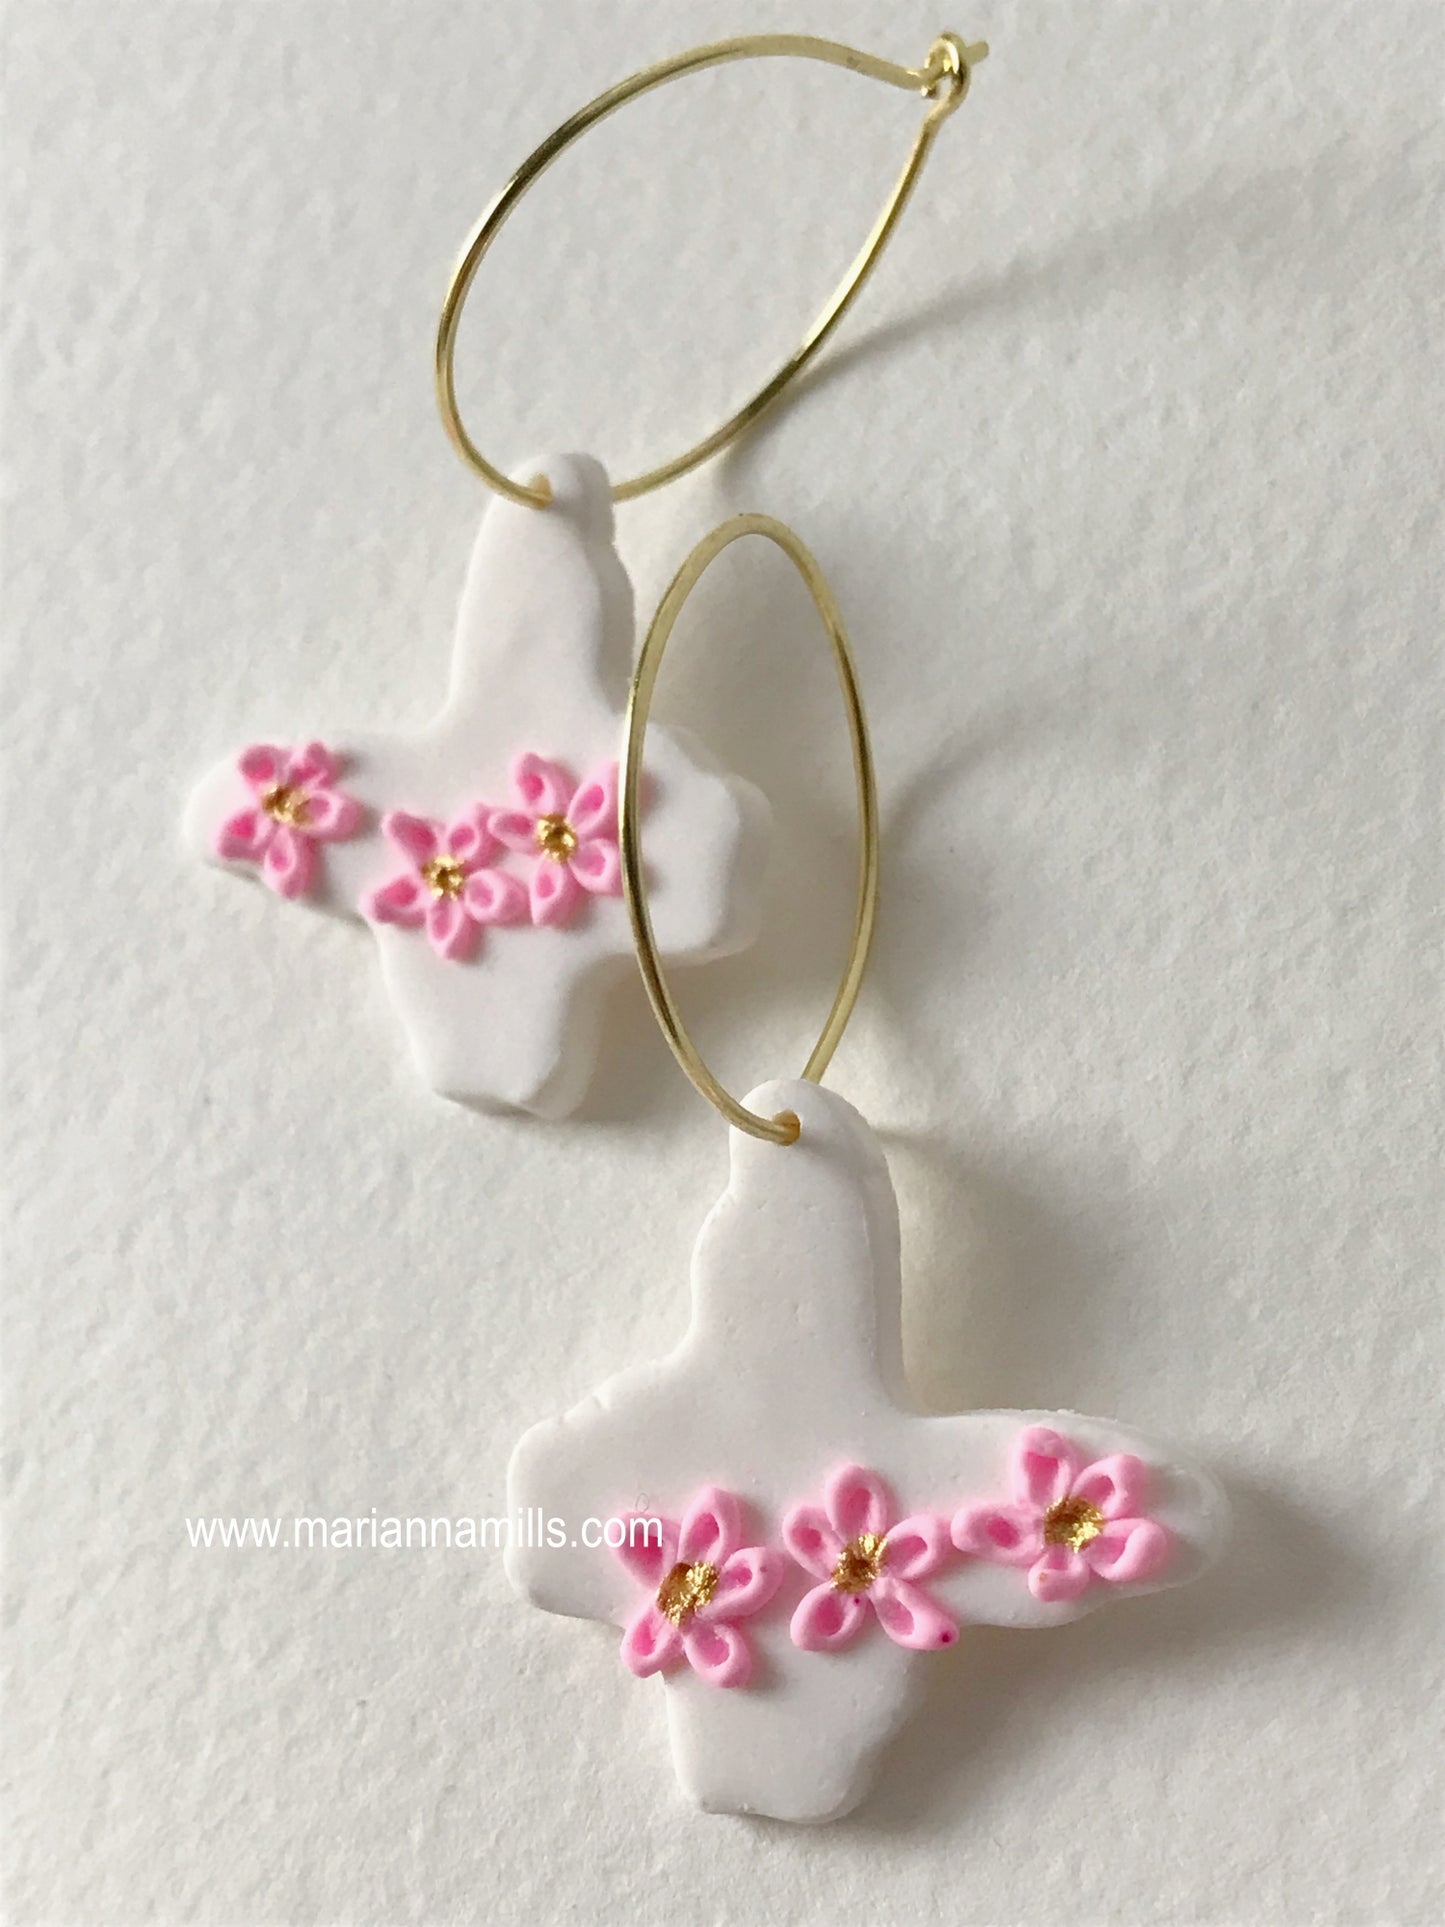 Sakura Butterfly - Artisan Statement Hoops Earrings - Hand Sculpted and Painted - Floral Boho Nature Polymer Clay Designed and Handmade by Marianna Mills